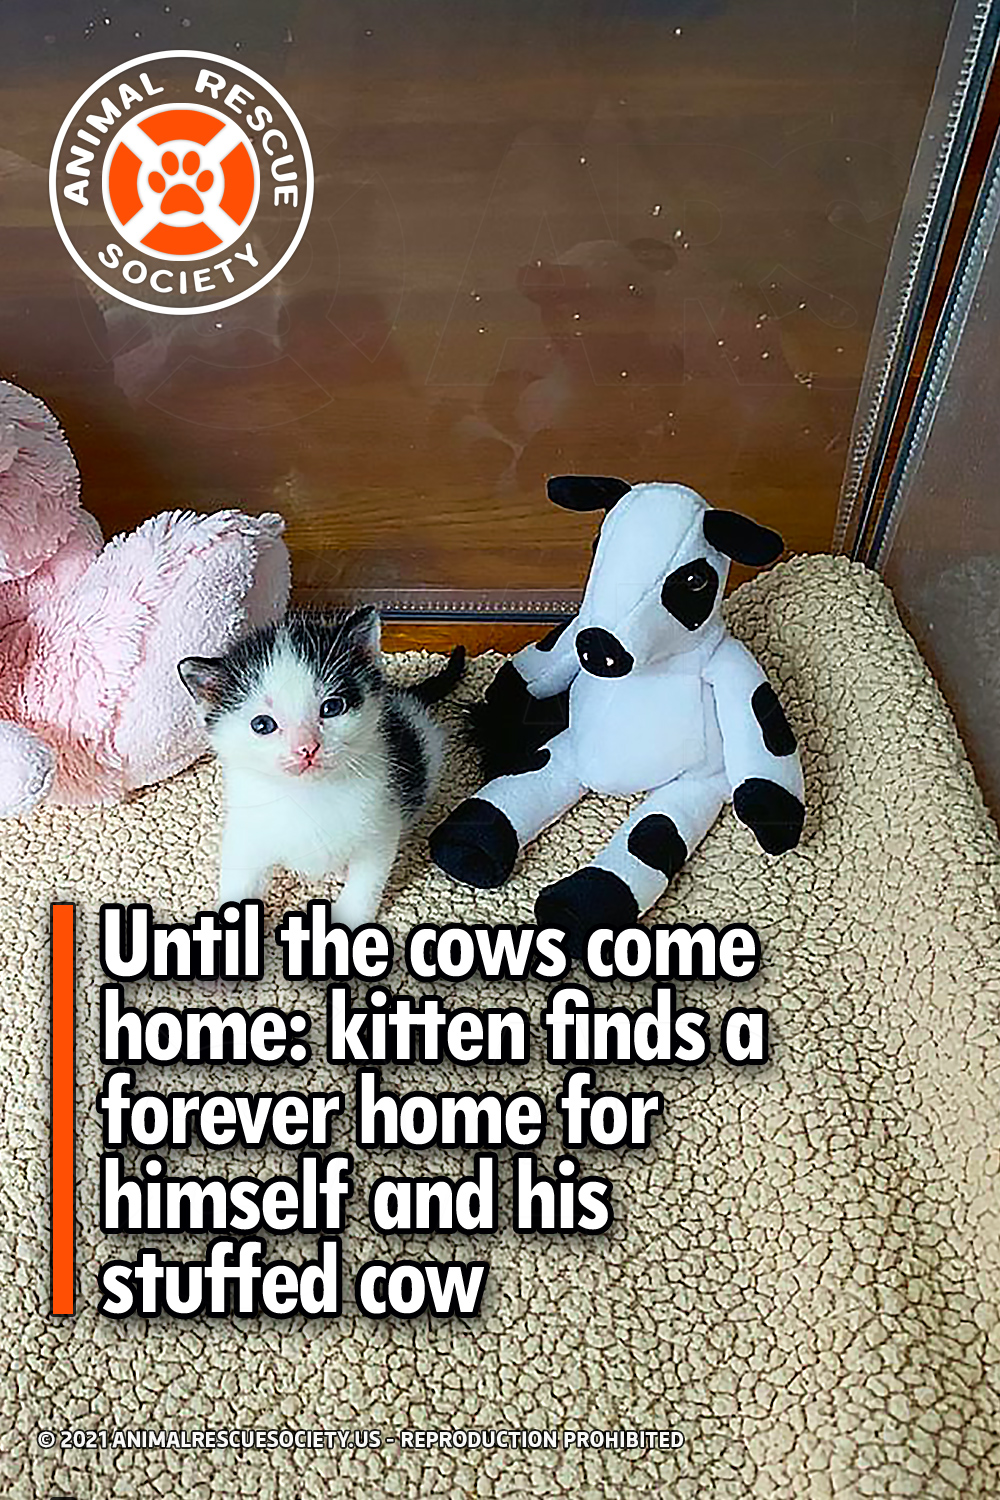 Until the cows come home: kitten finds a forever home for himself and his stuffed cow